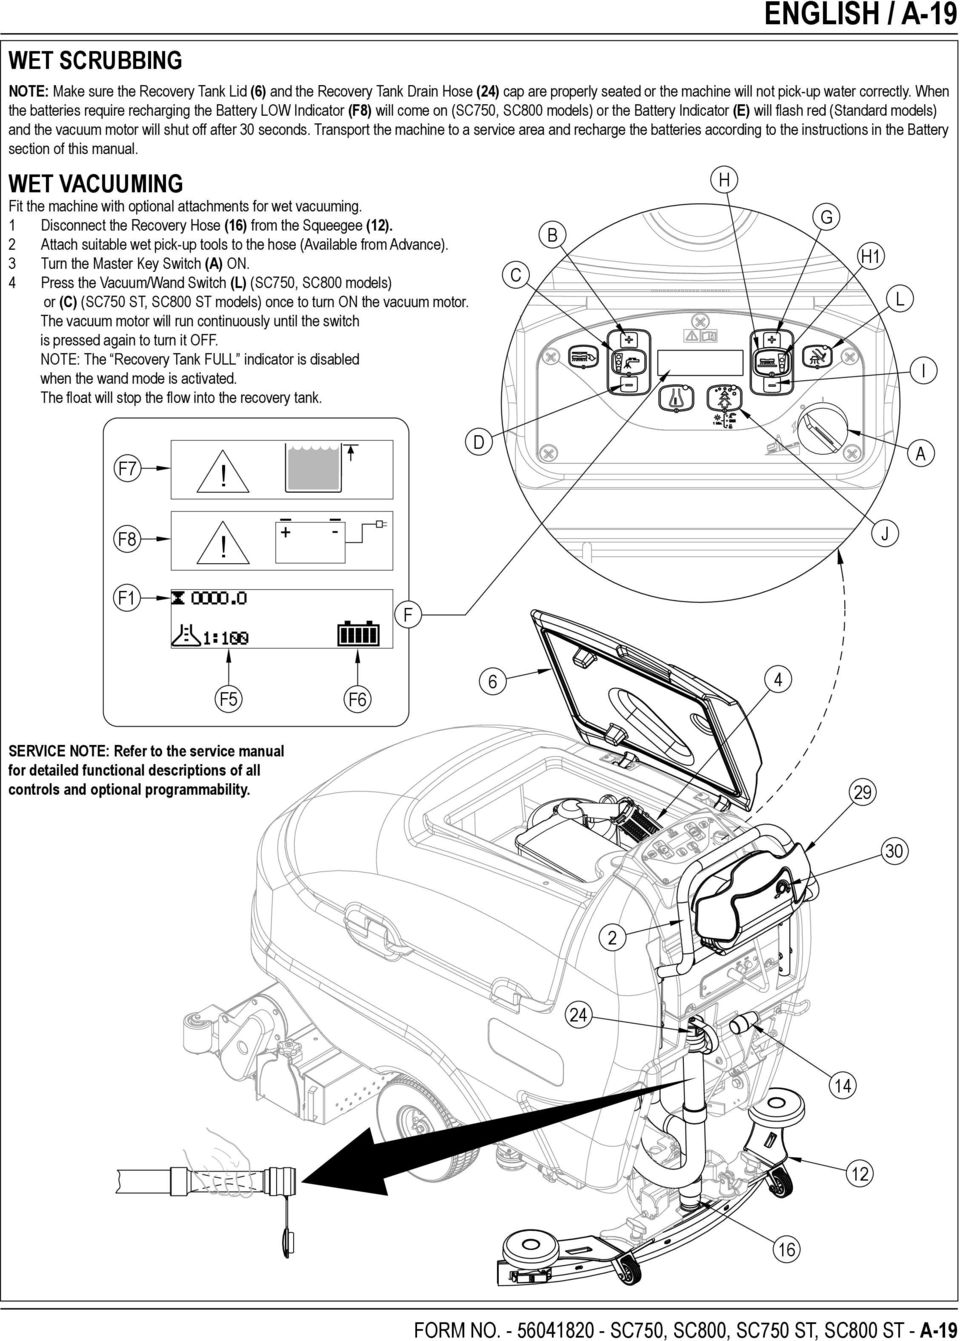 off after 30 seconds. Transport the machine to a service area and recharge the batteries according to the instructions in the Battery section of this manual.